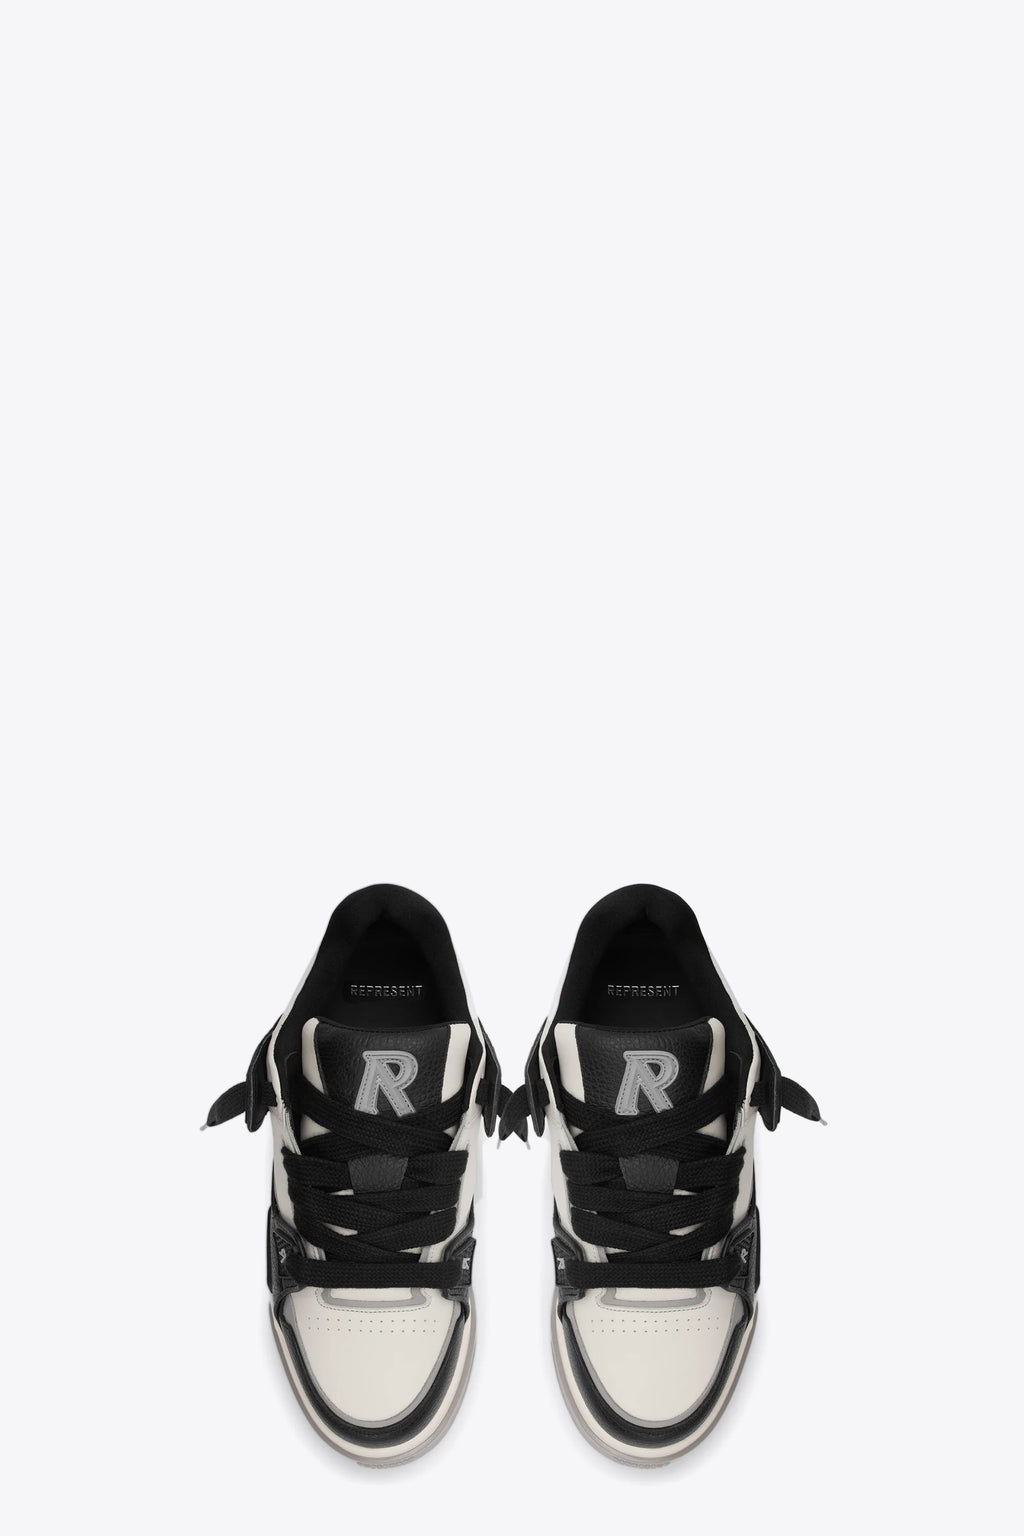 alt-image__Off-white-and-black-leather-low-chunky-sneaker---Studio-sneaker